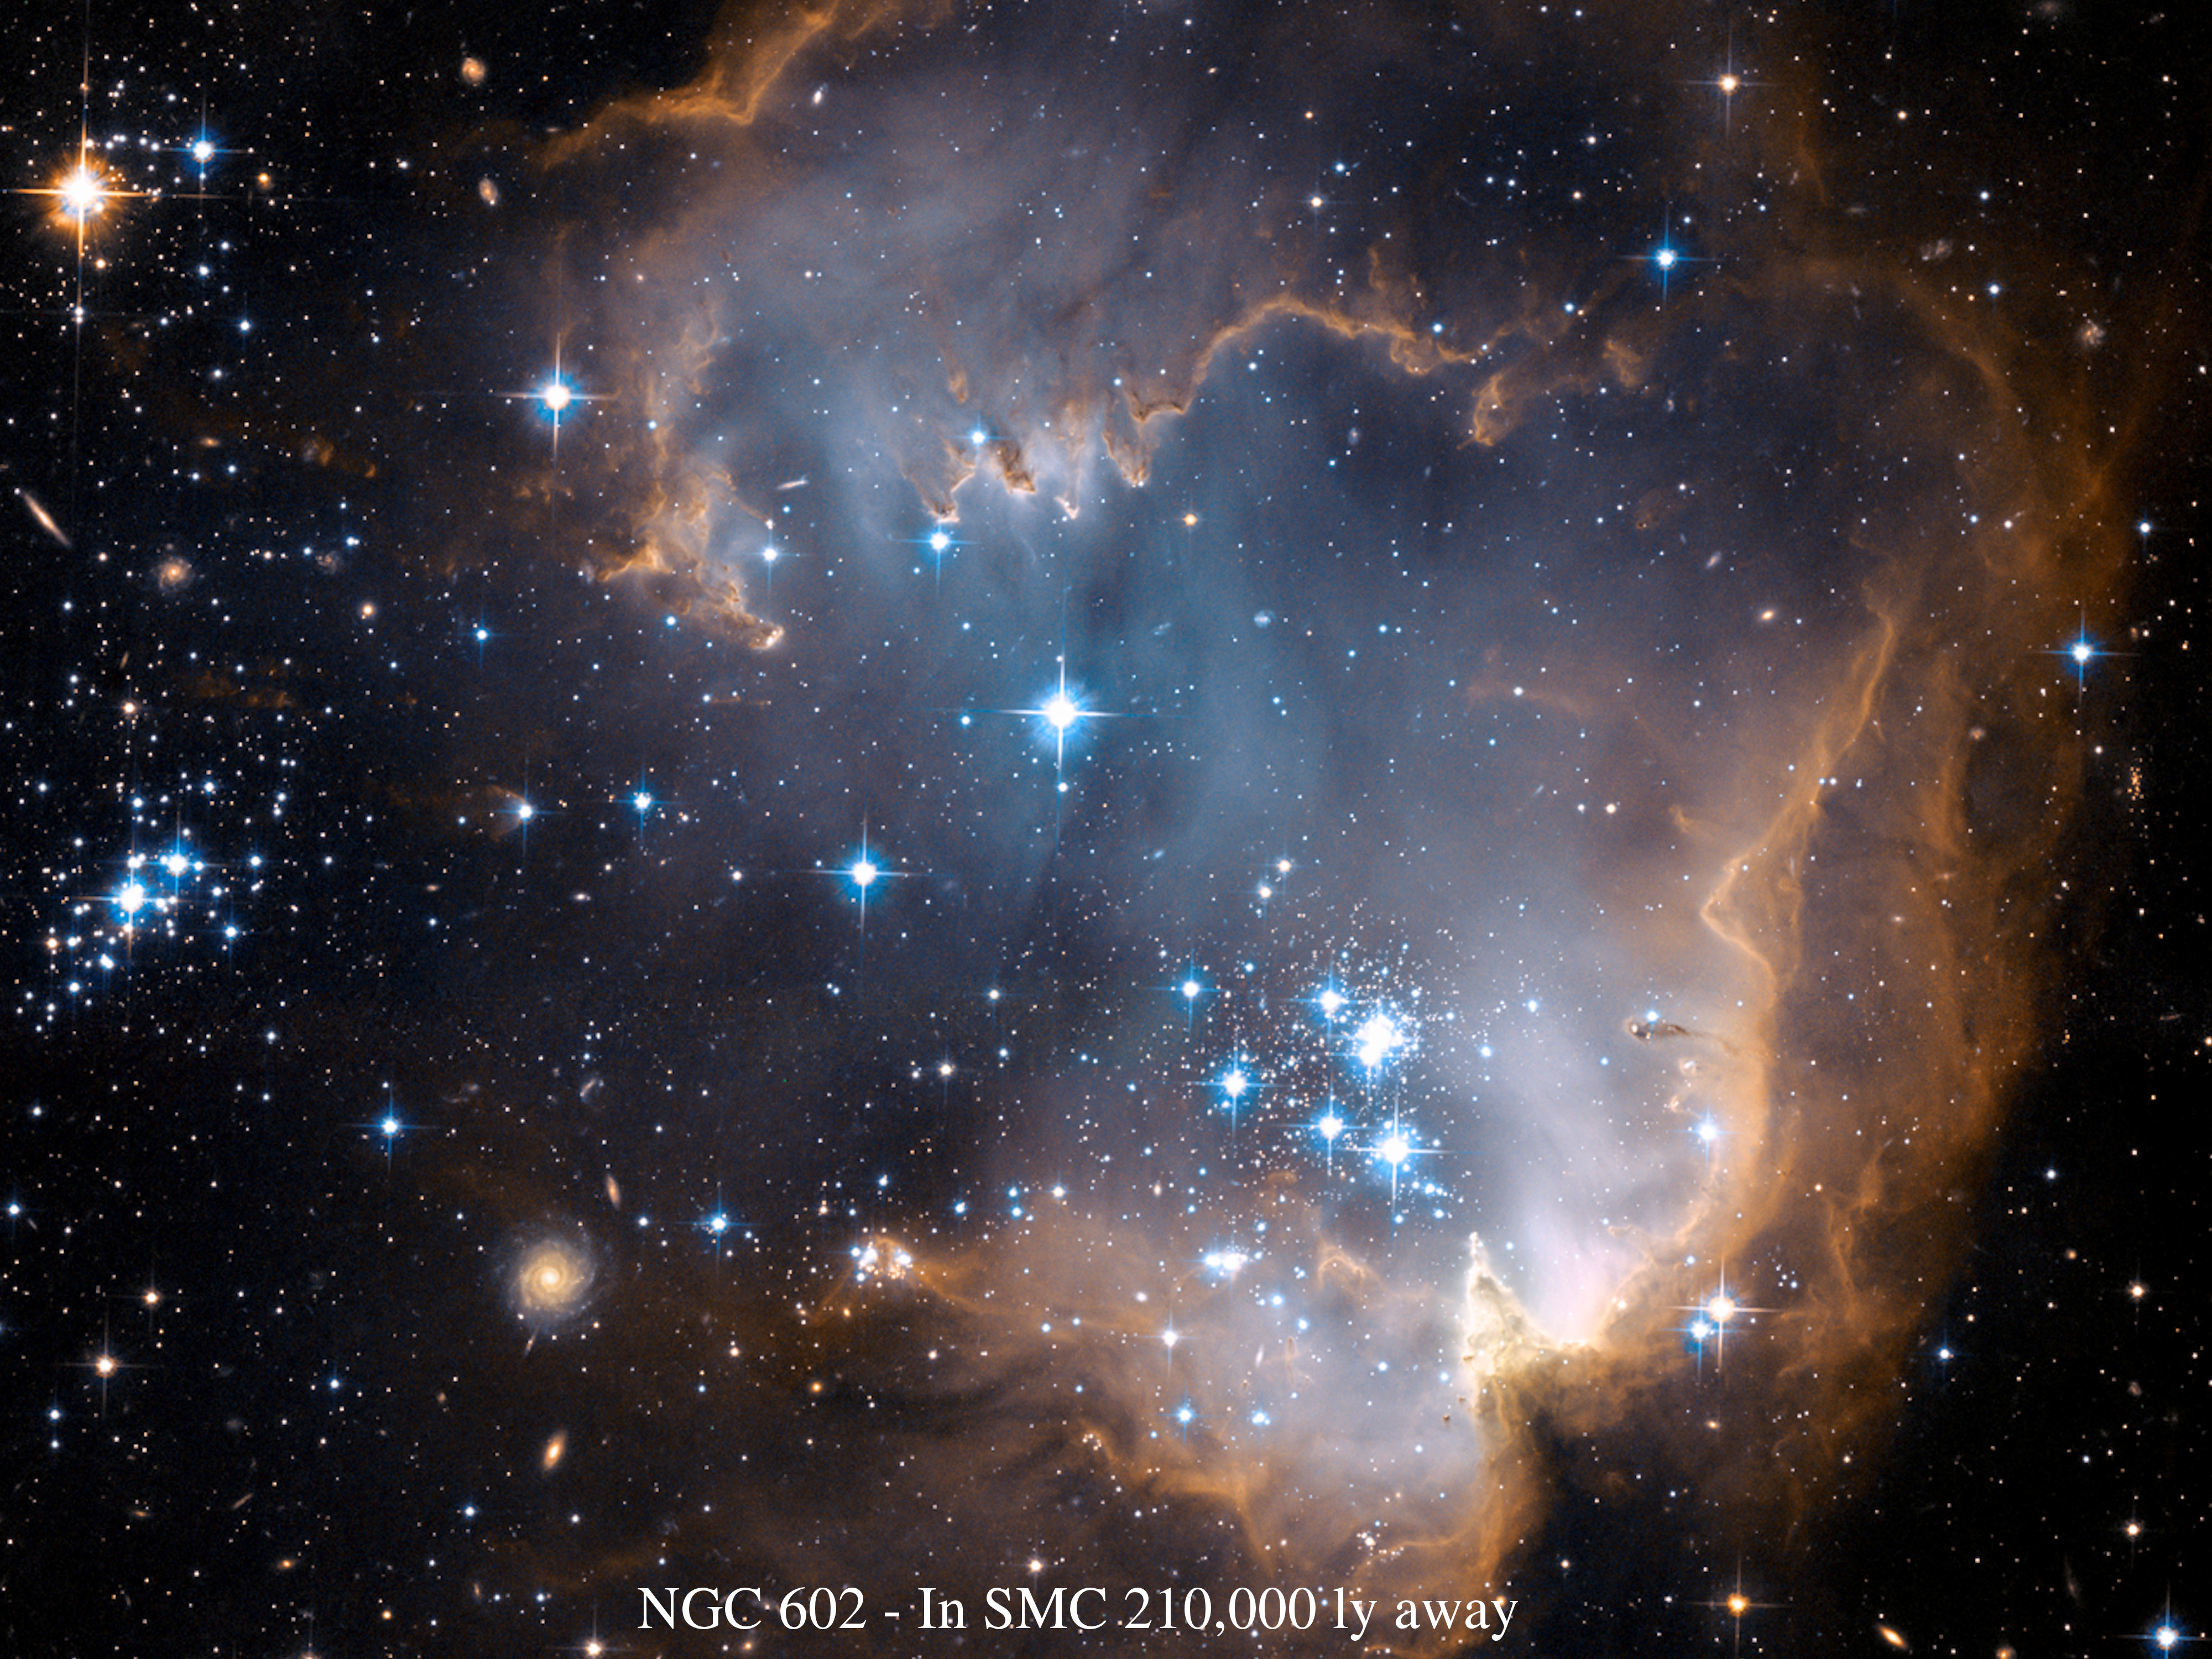 http://gbphotodidactical.ca/images/wallpaper-26-fs-15-space-NGC-602-in-SMC-210,000-ly-away-original-fs.jpg